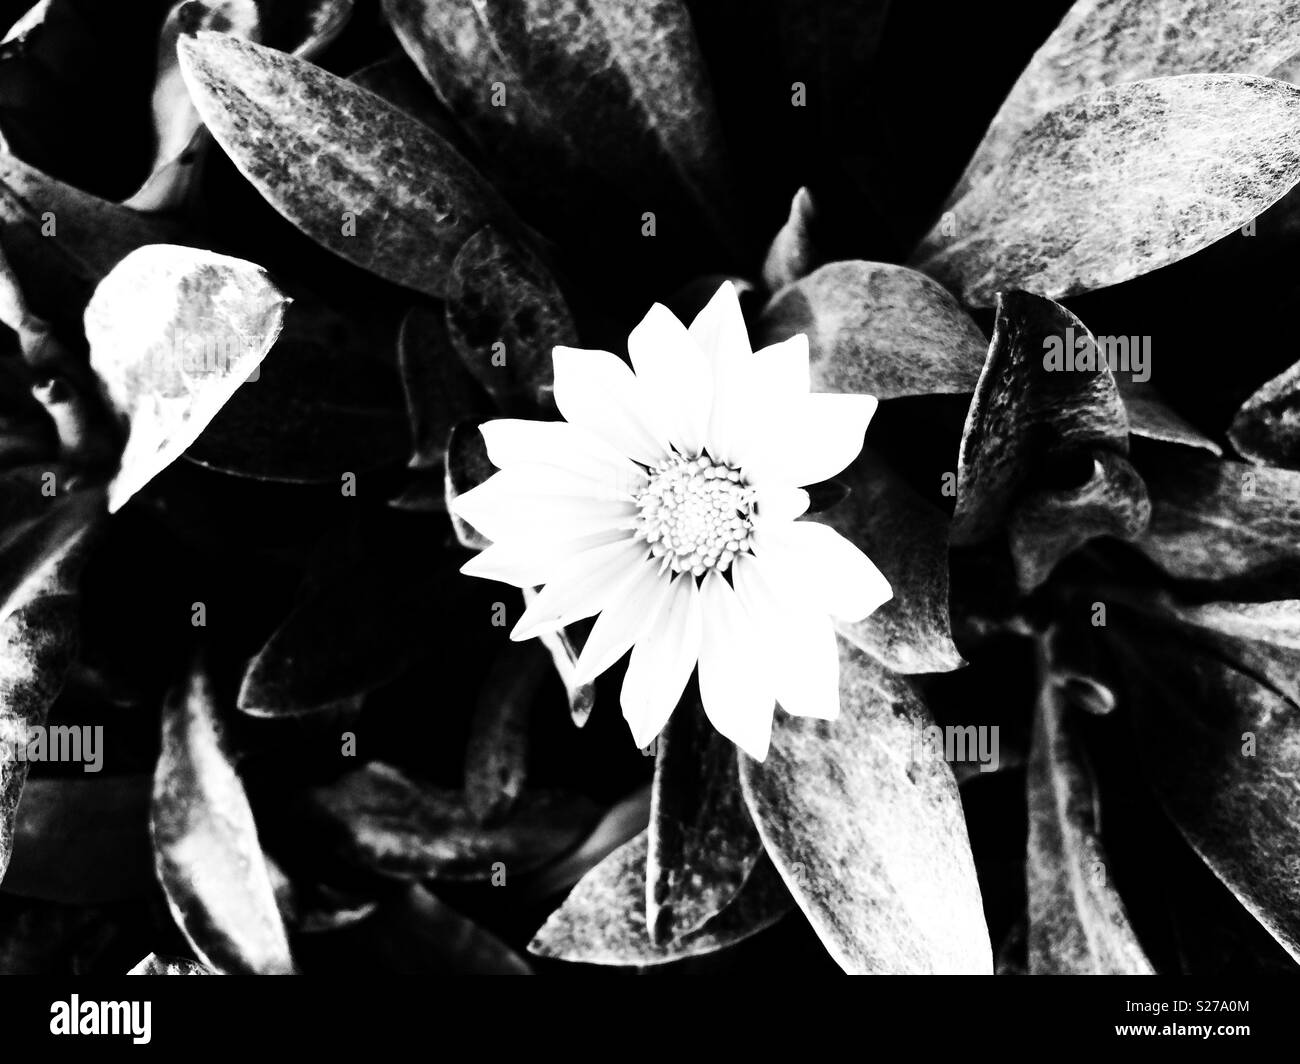 Single flower in leaf arrangement from nature's garden given a contemporary edge with black and white editing Stock Photo